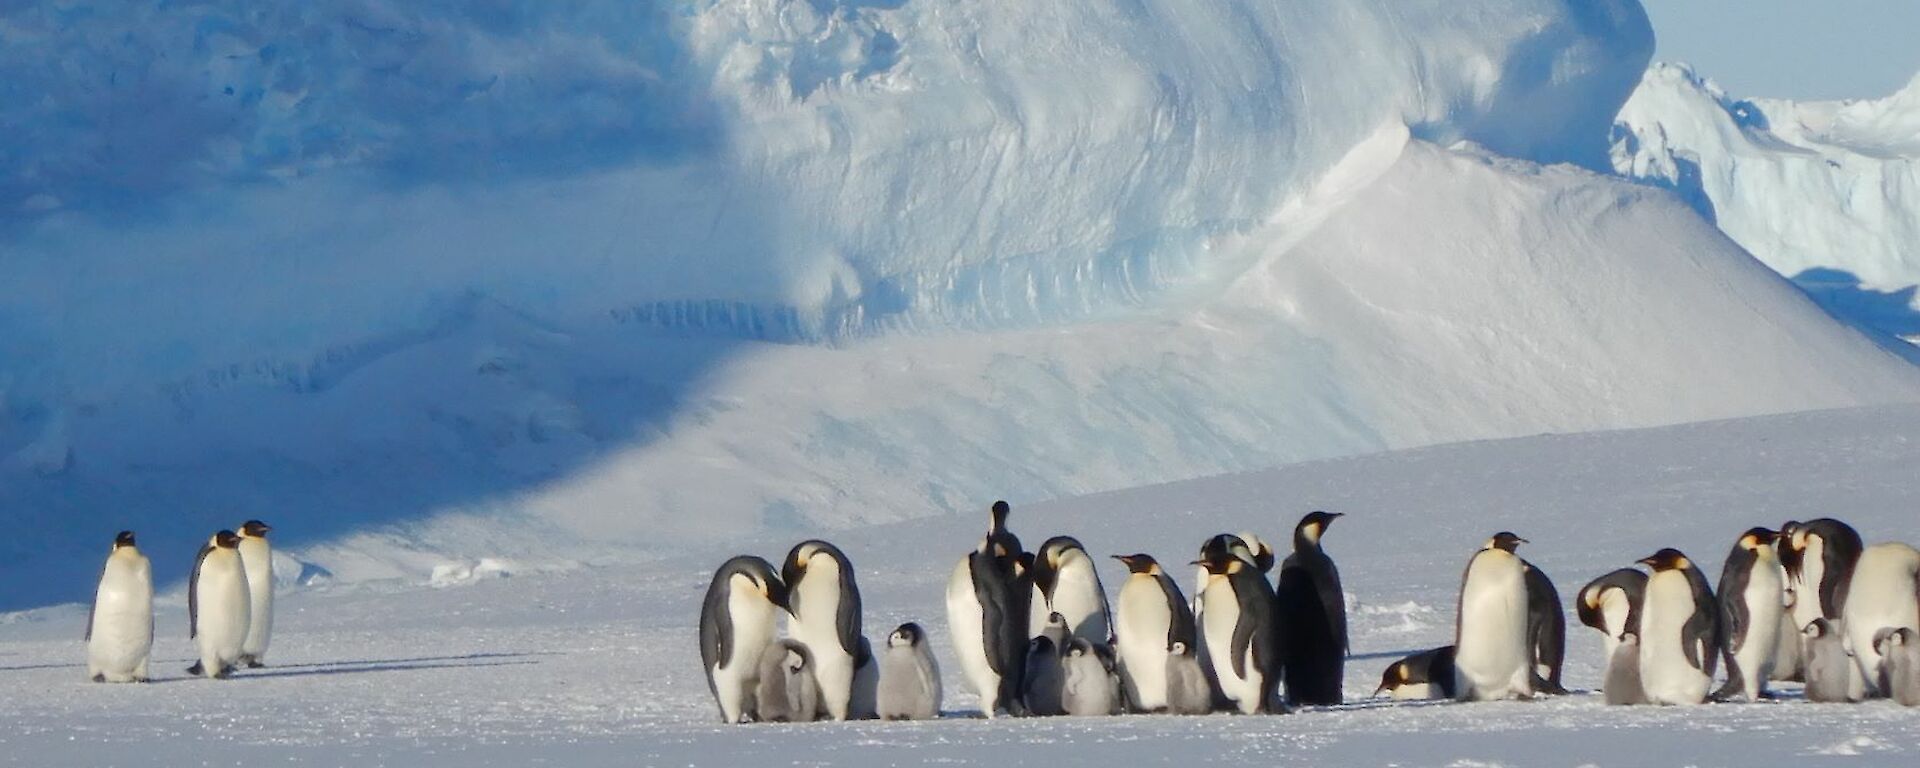 A group of adult emperor penguins with their young chicks on the sea ice.